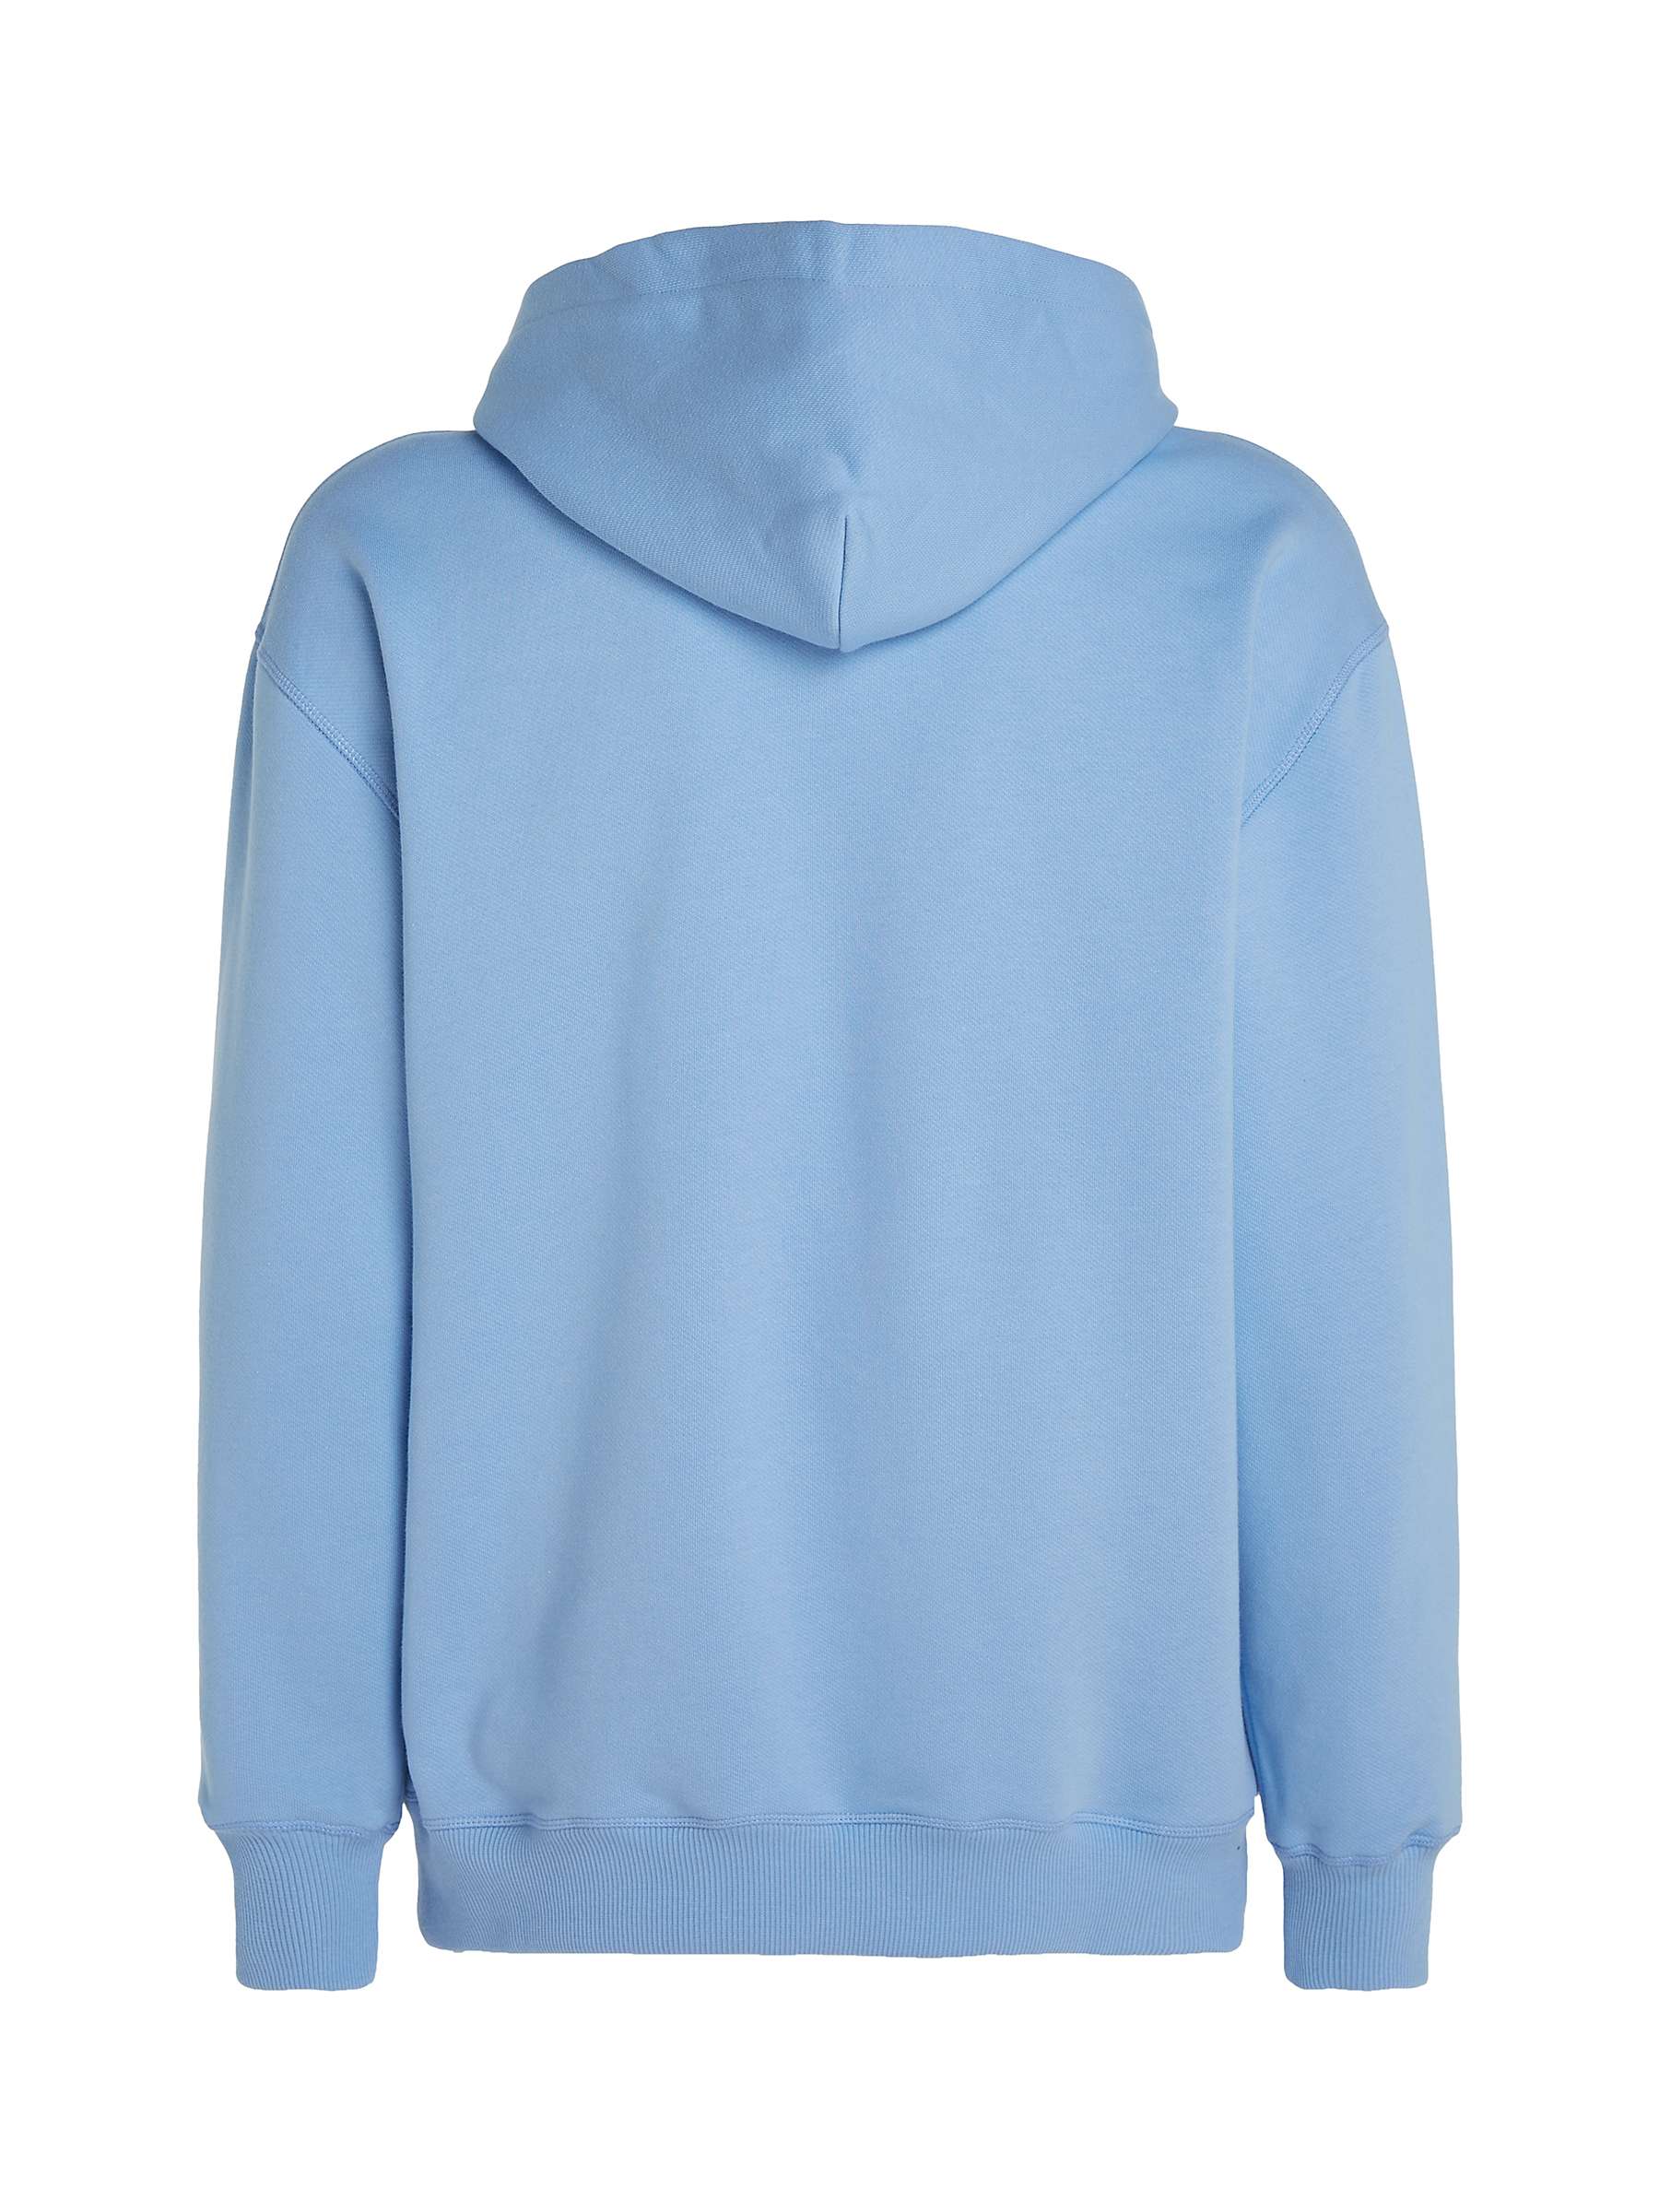 Buy Tommy Jeans Relaxed Cotton Hoodie, Moderate Blue Online at johnlewis.com